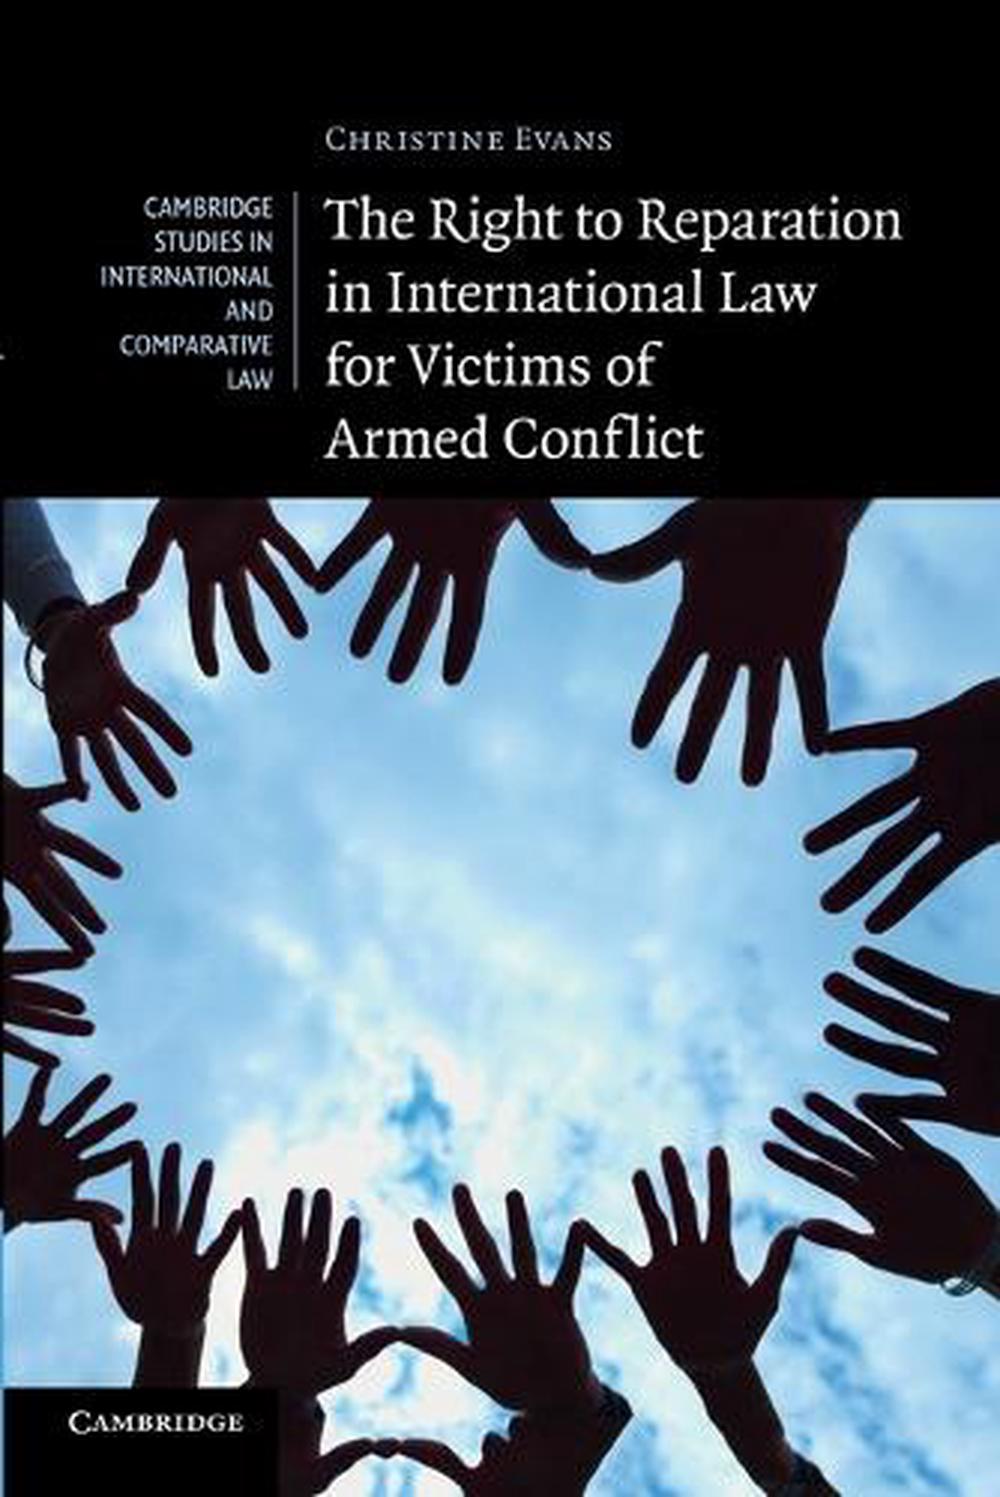 are human rights protected in law of armed conflict